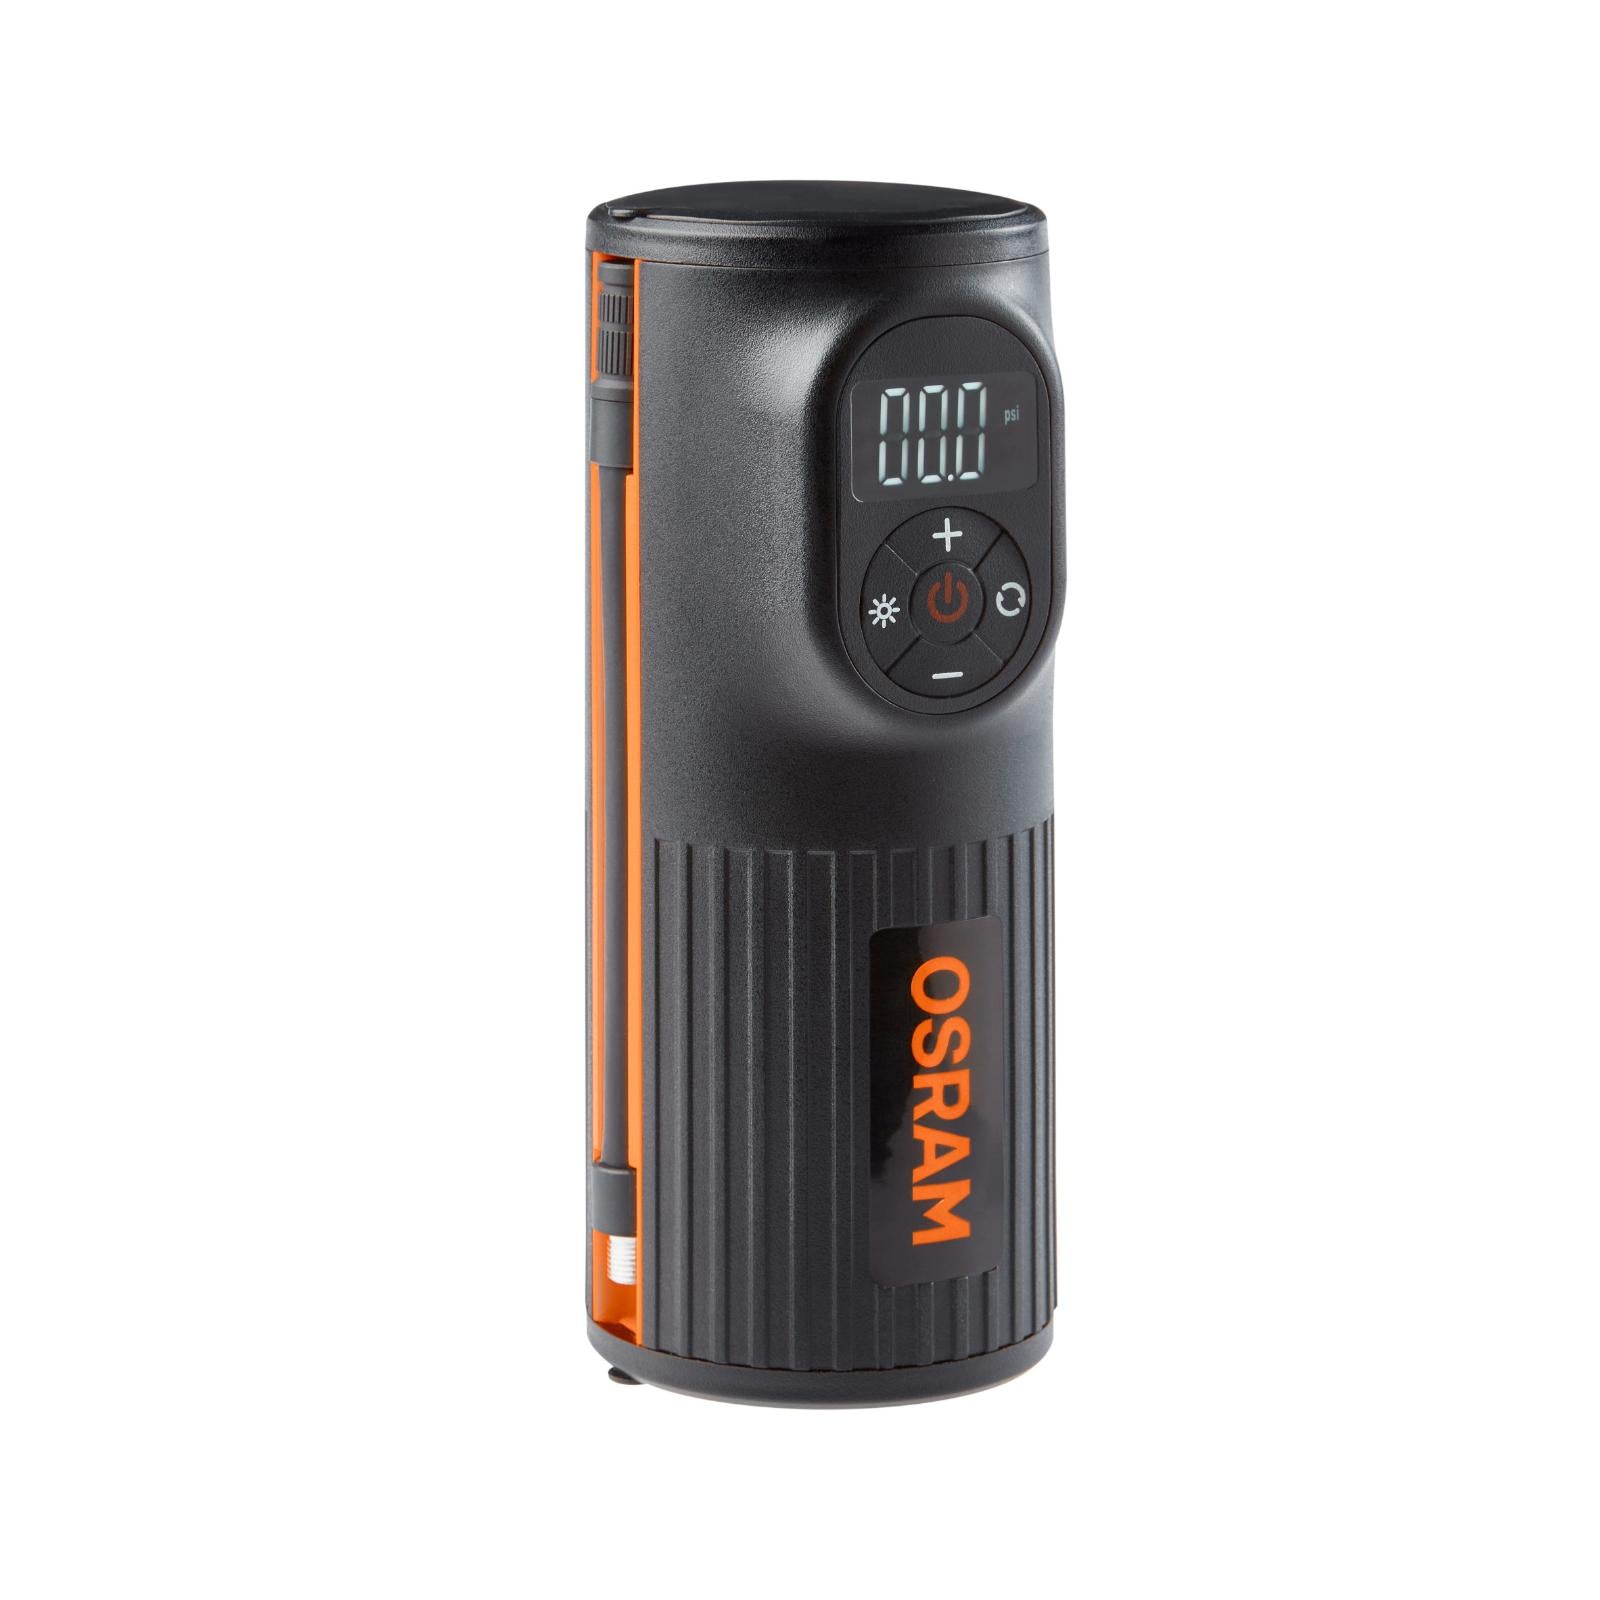 OSRAM TYRE inflate, 2000 Tyre inflator